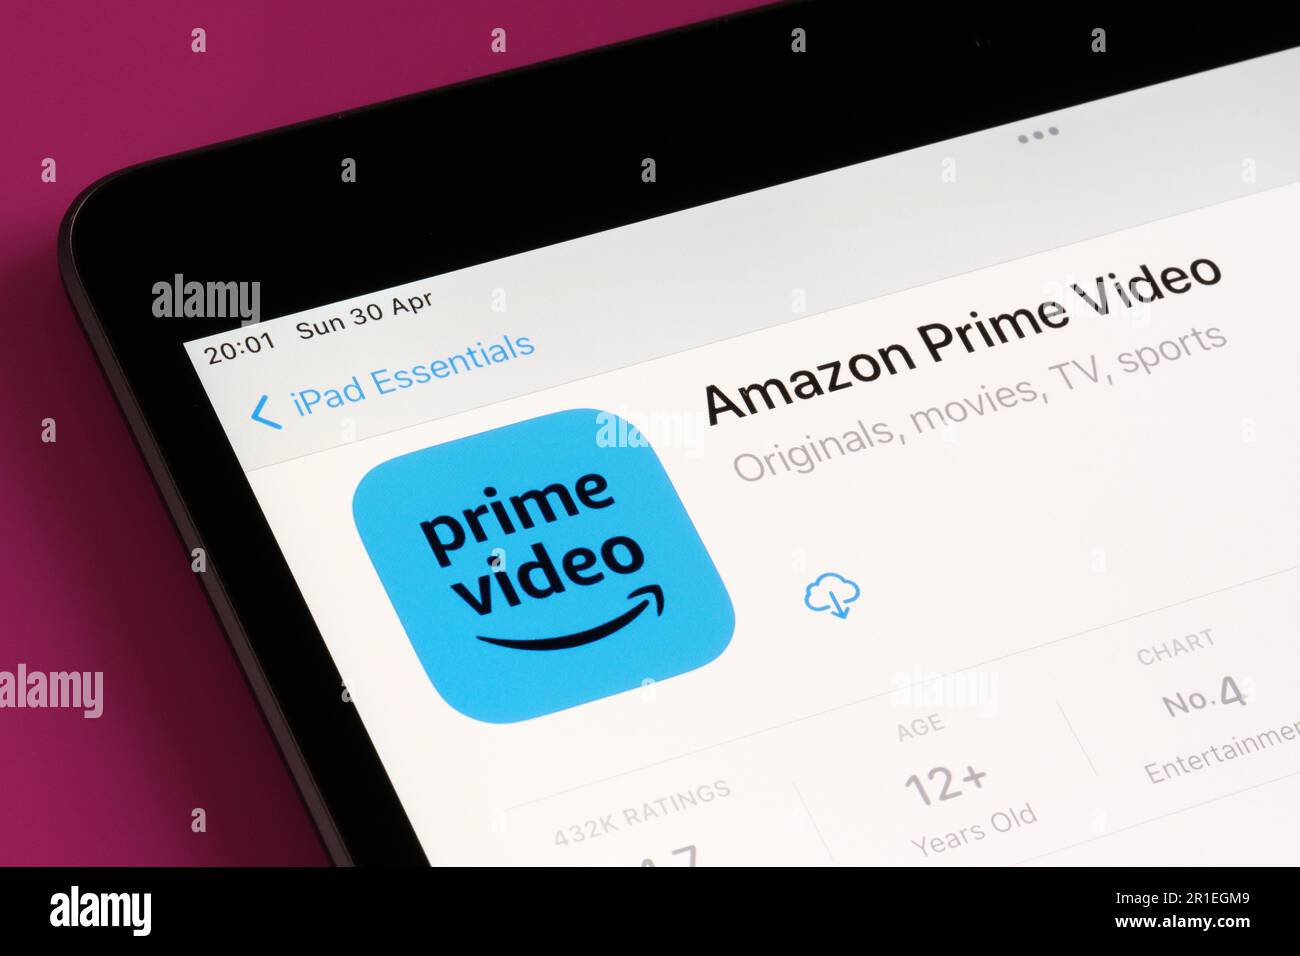 Prime Video on the App Store